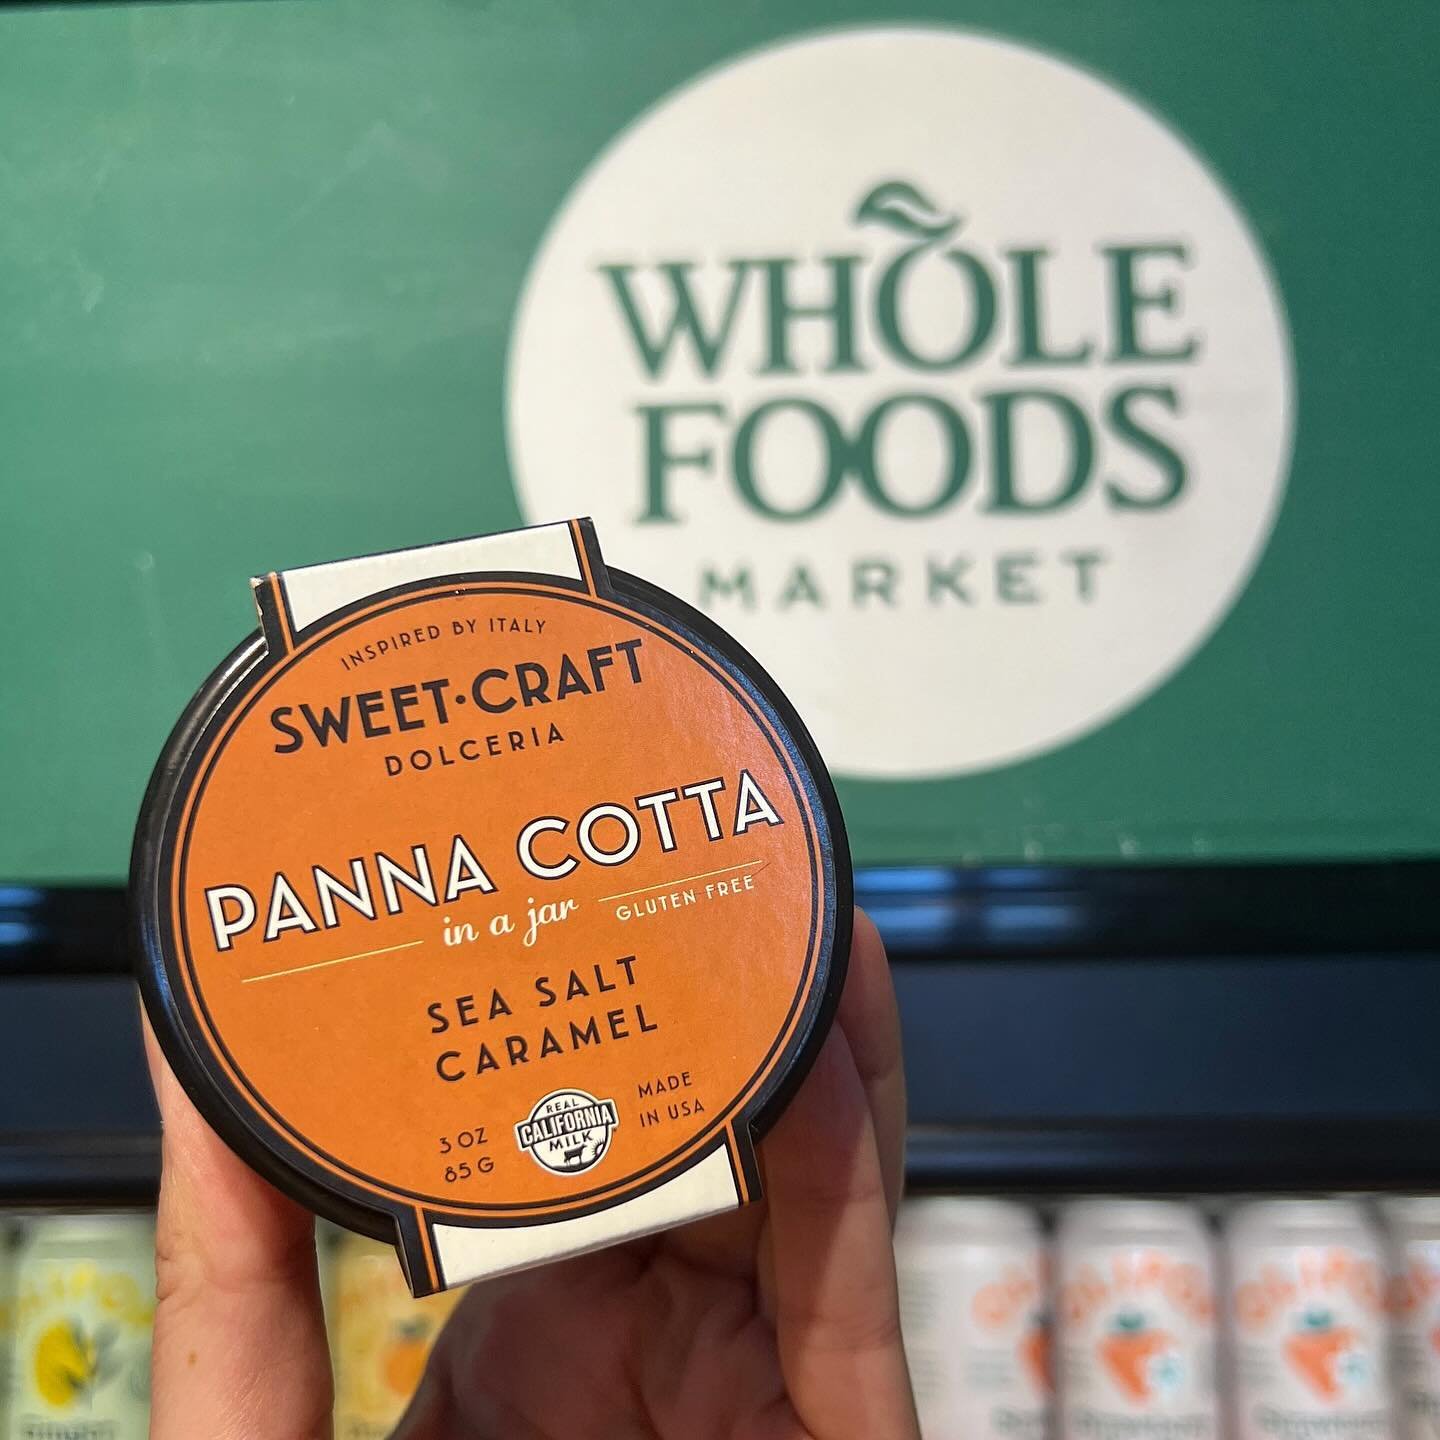 Spotted in the wild 😍 Sweet Craft deliciousness @wholefoods Irvine! Don&rsquo;t, worry, we remerchandised the jars we stocked up on #leaveitbetterthanyoufoundit 😏

#SweetCraftDolceria #DessertsInAJar #wholefoods